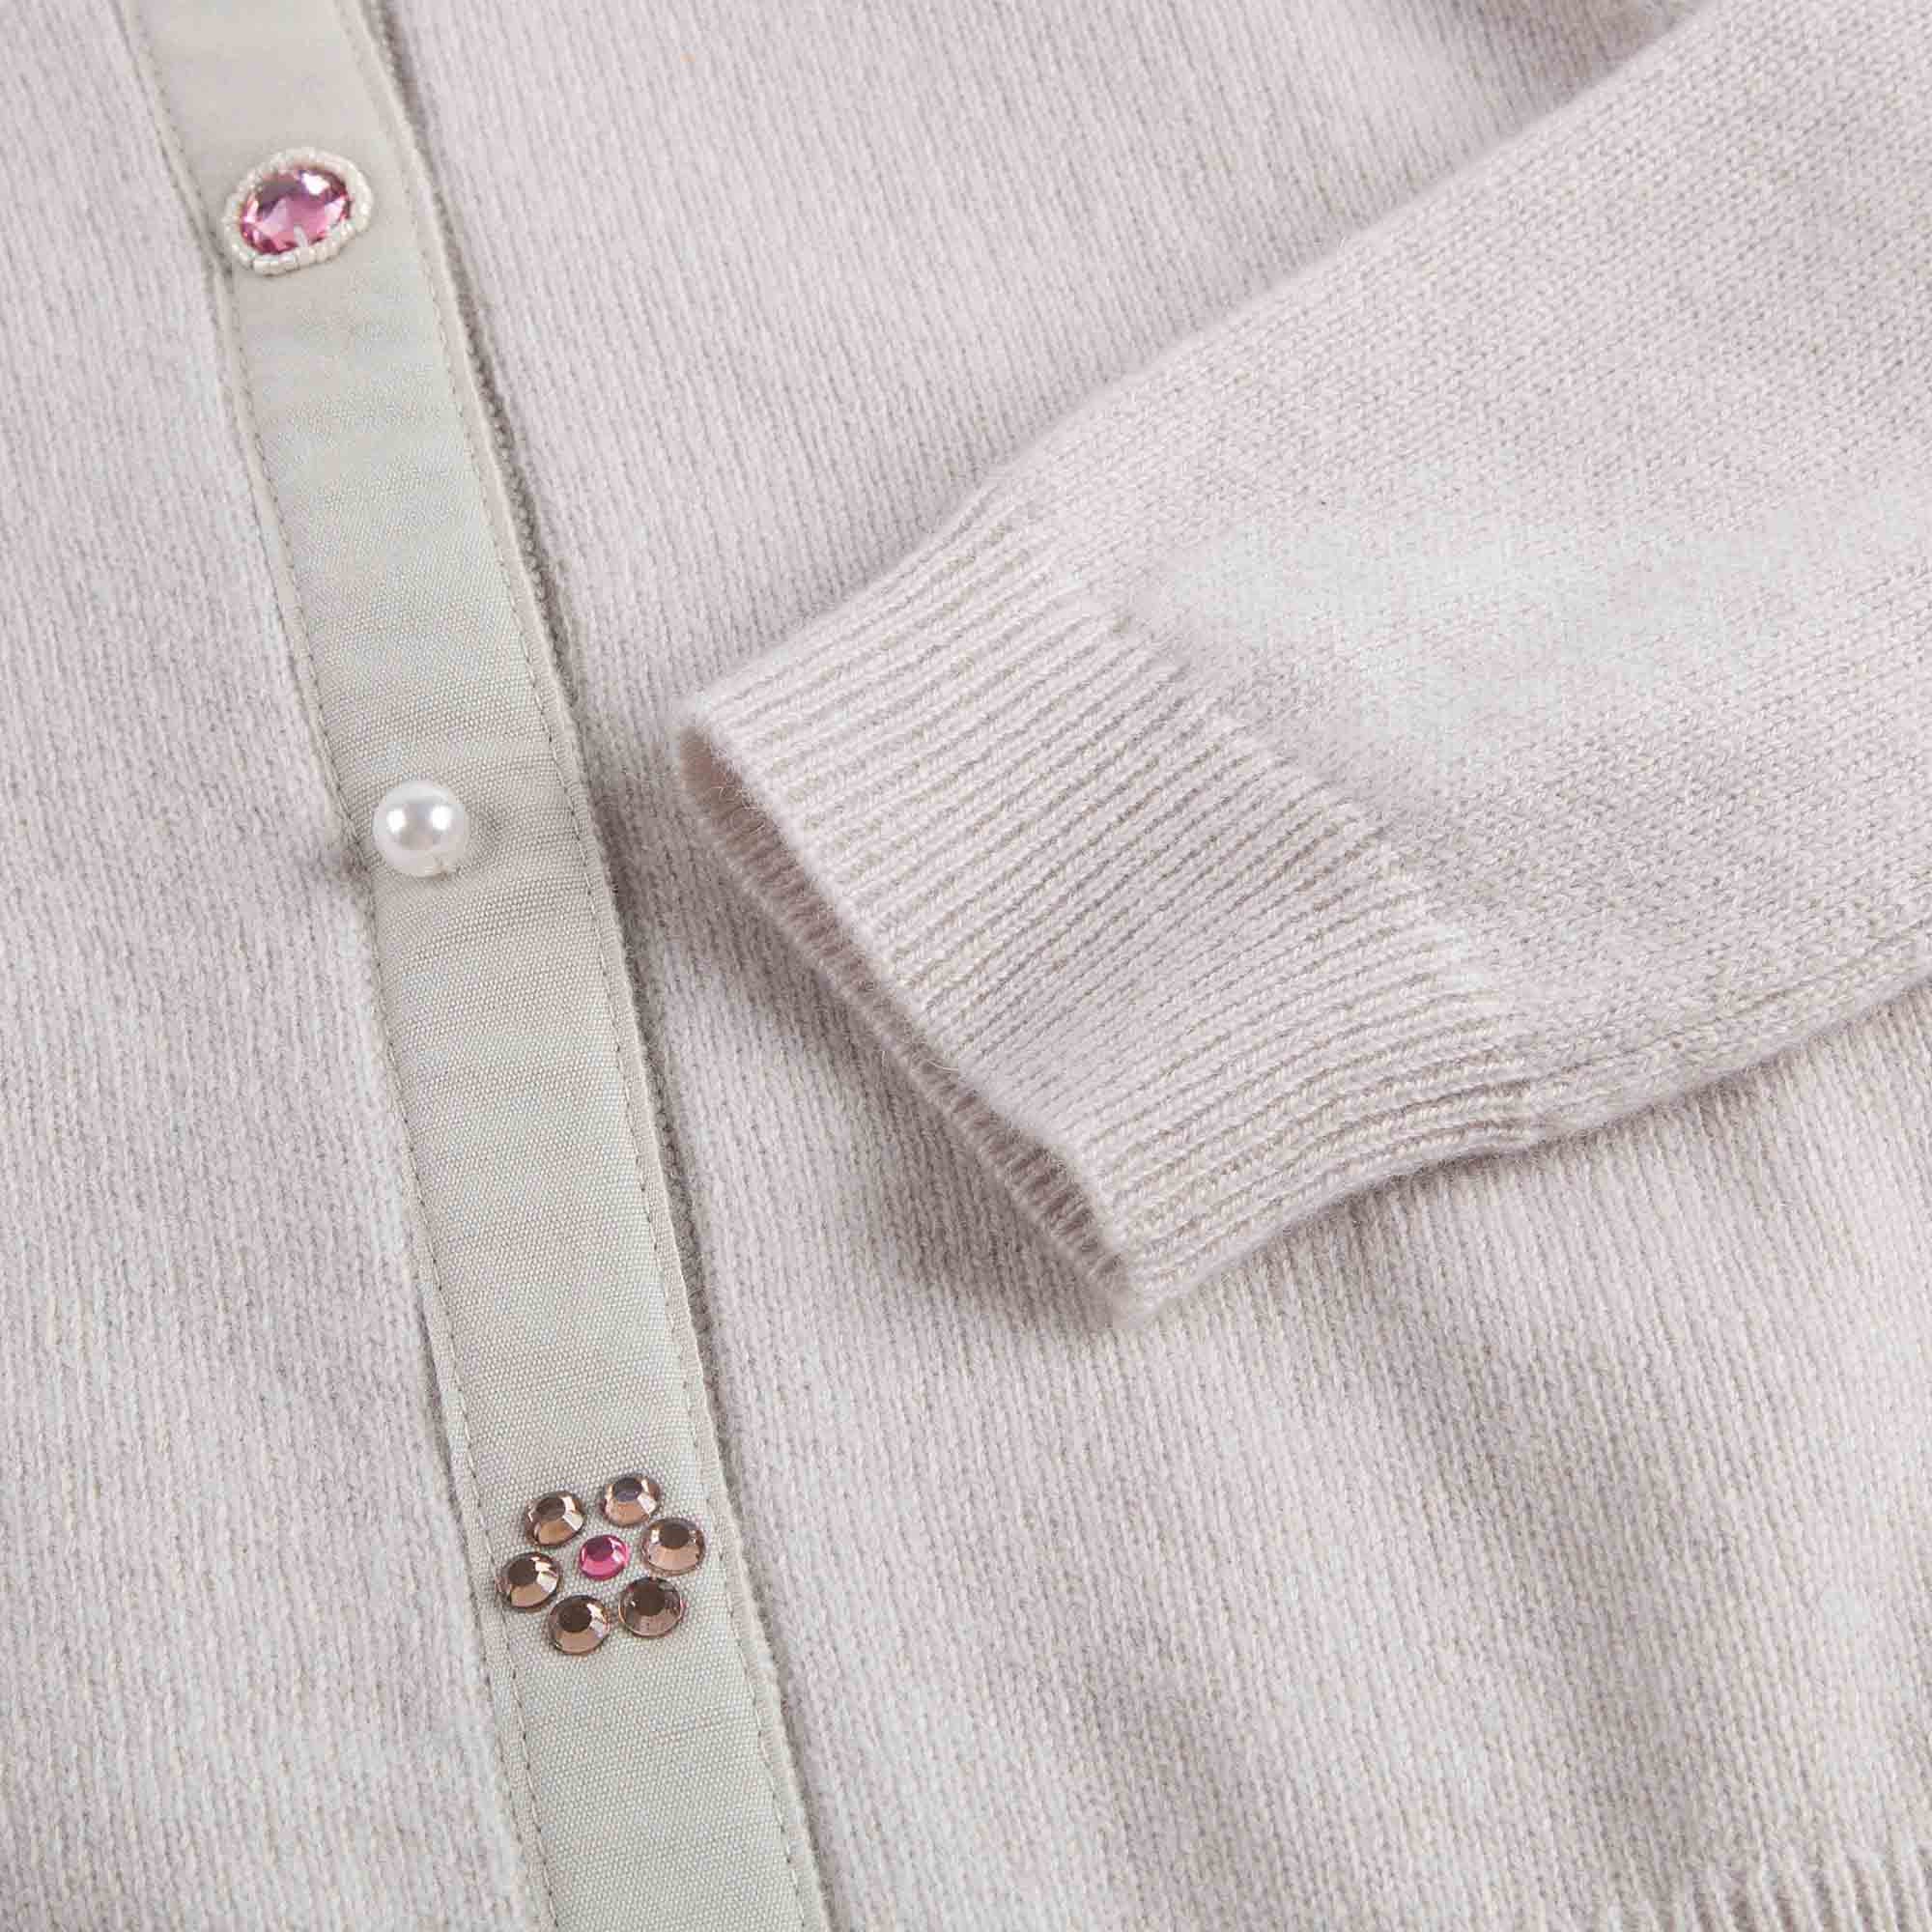 Girls Light Grey With Flowers Buttons Cashmere Sweater - CÉMAROSE | Children's Fashion Store - 4